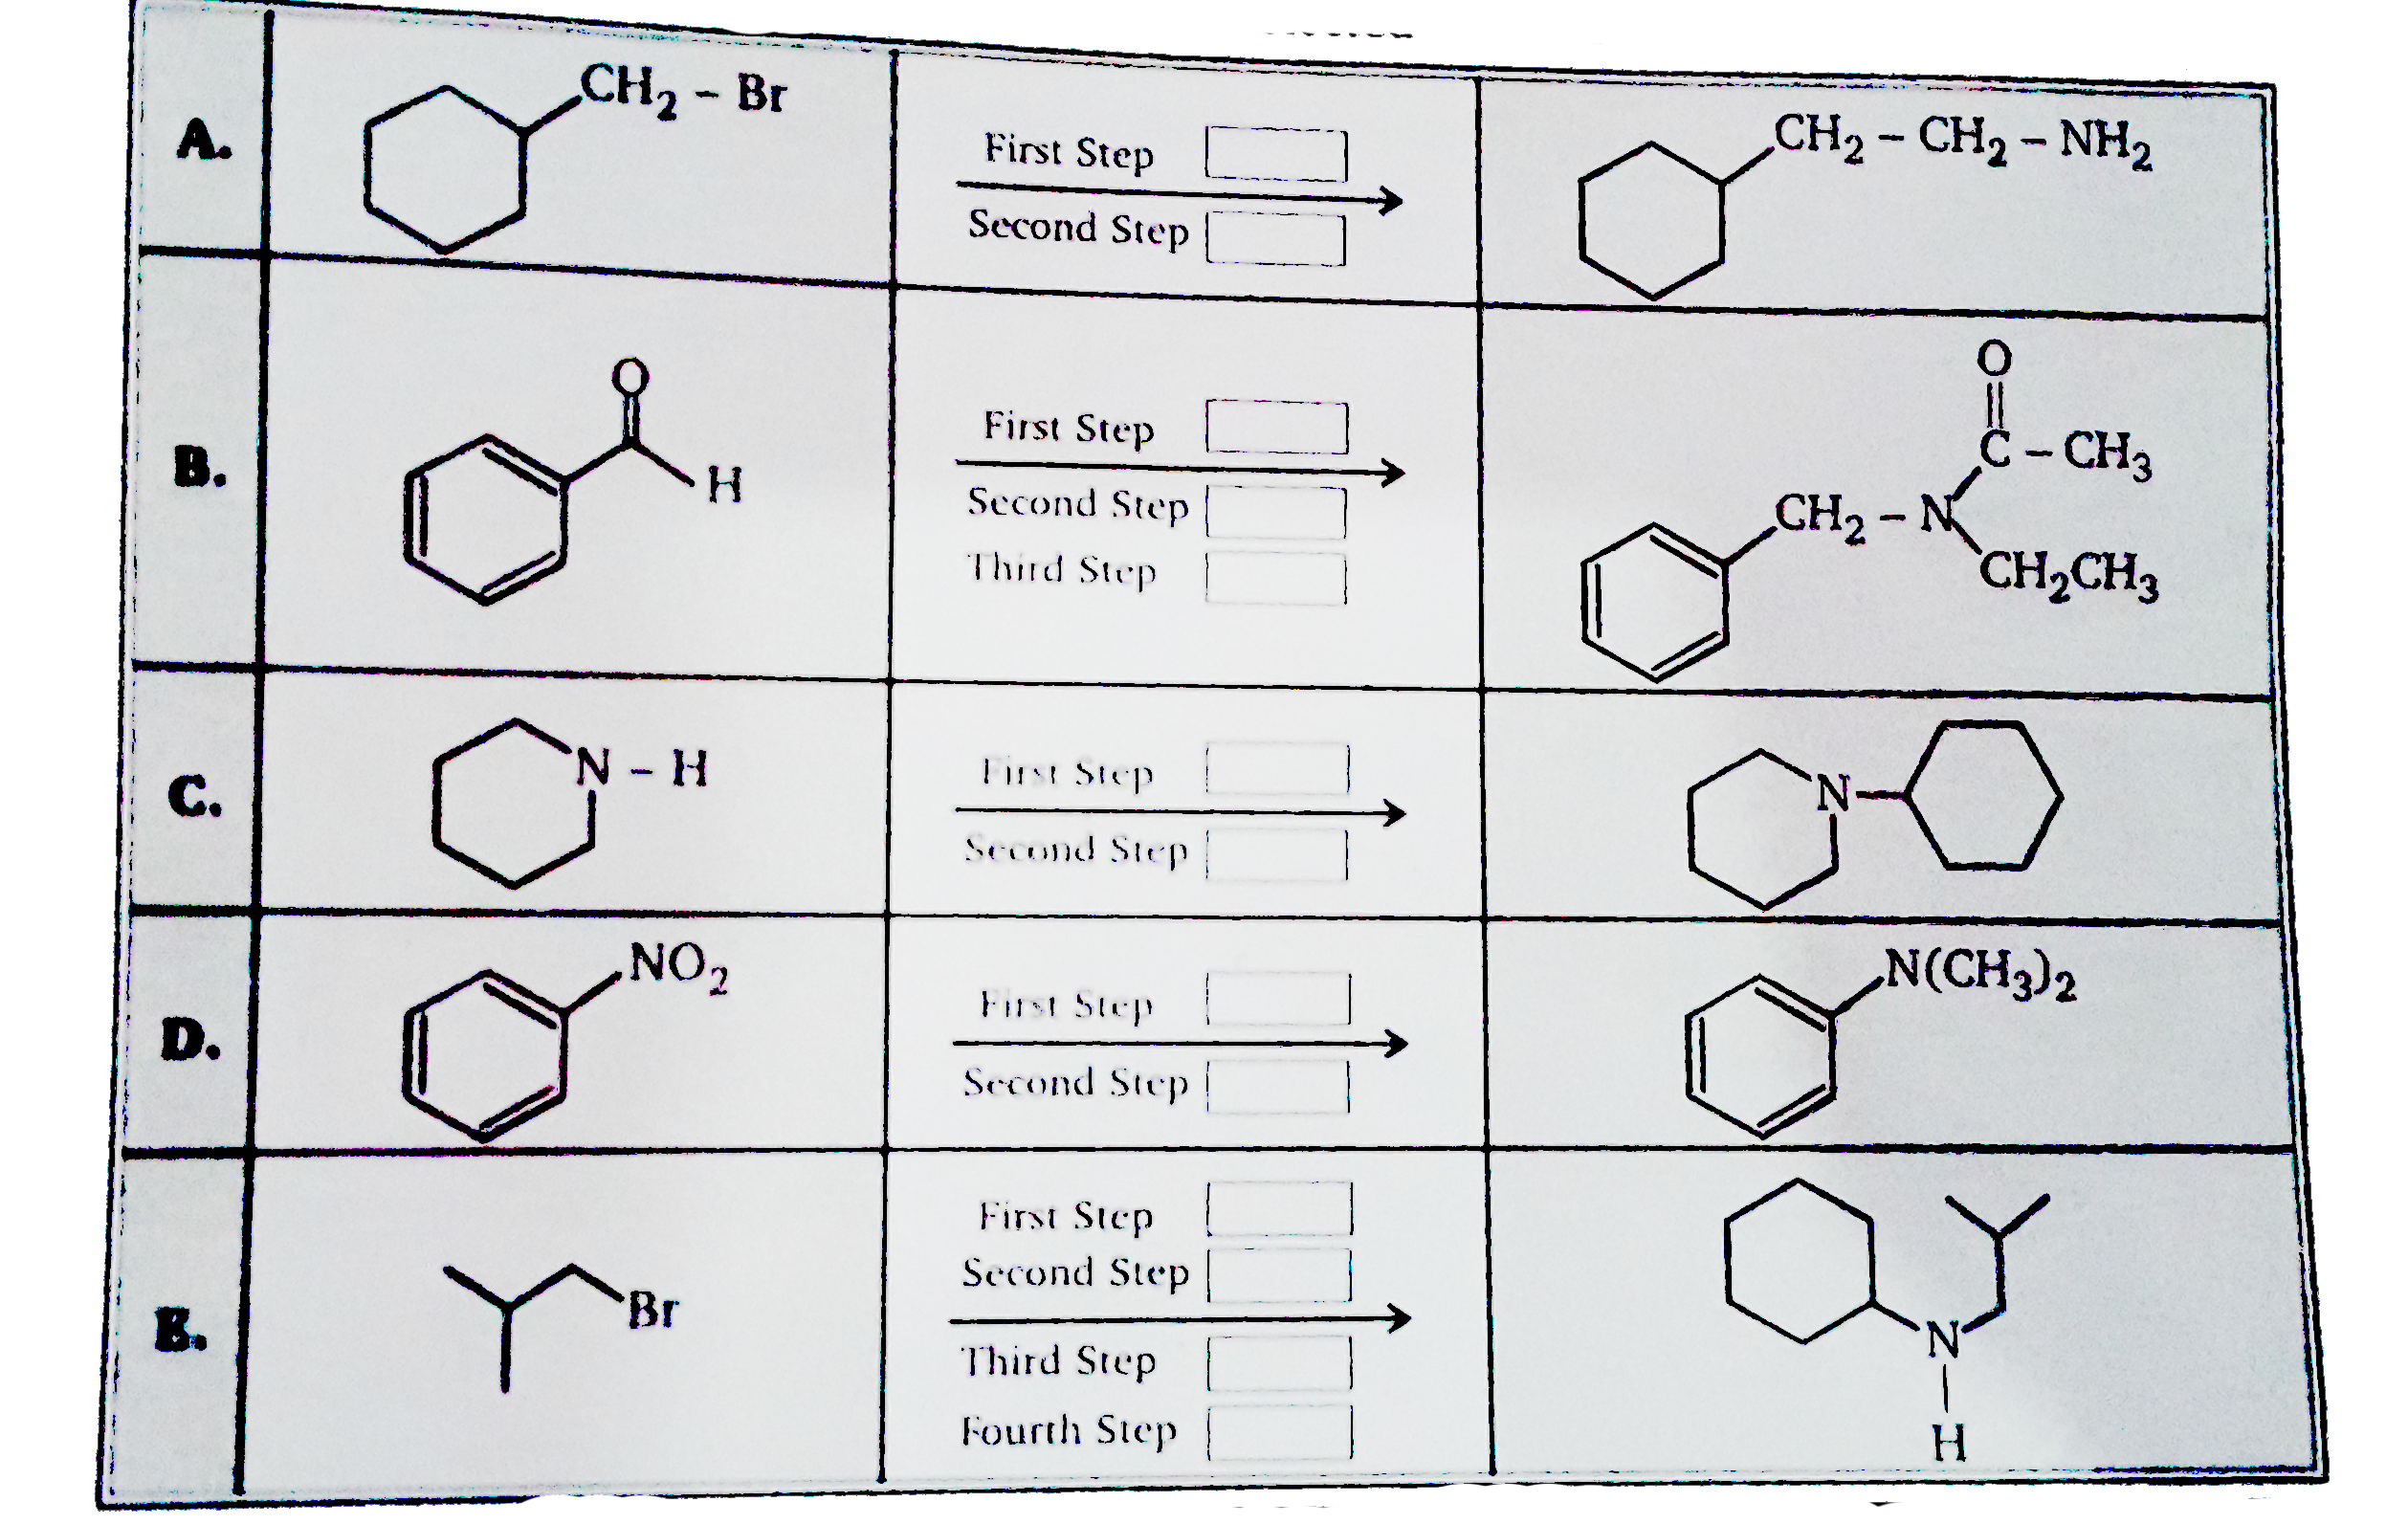 Five amine synthesis are outlined below. In each reactions box enter a single letter designating the best reagent and conditions selected from the list at the bottom of the page.      a) i) LiAlH(4) in ether, ii) H(2)O & base   b) C(2)H(5)NH(2)(cat. H^(+))   c) NaCN in alcohol   d) H(2) & Ni catalyst or H(2) & Pd catalyst   e) NaN(3) in alcohol   f) (CH(3)CO)(2) & pyridine   g) C(2)H(5)Br   h)    (i) 2CH(3)I & pyridine   j) KOH in H(2)O